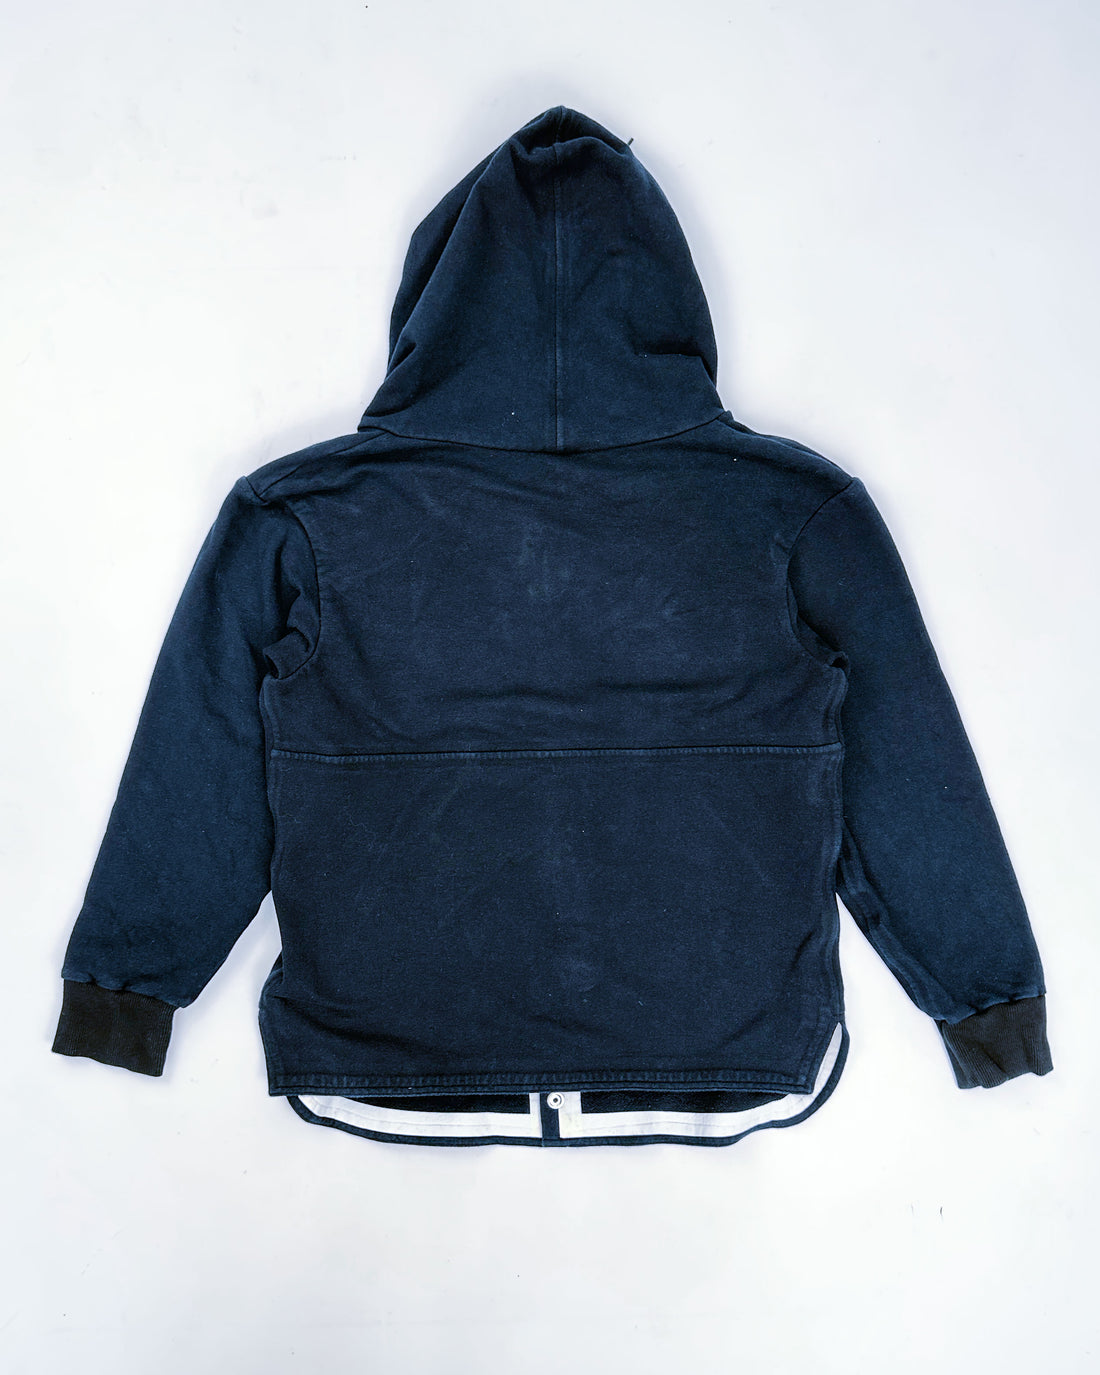 Marni Buttoned Navy Hoodie 2000's